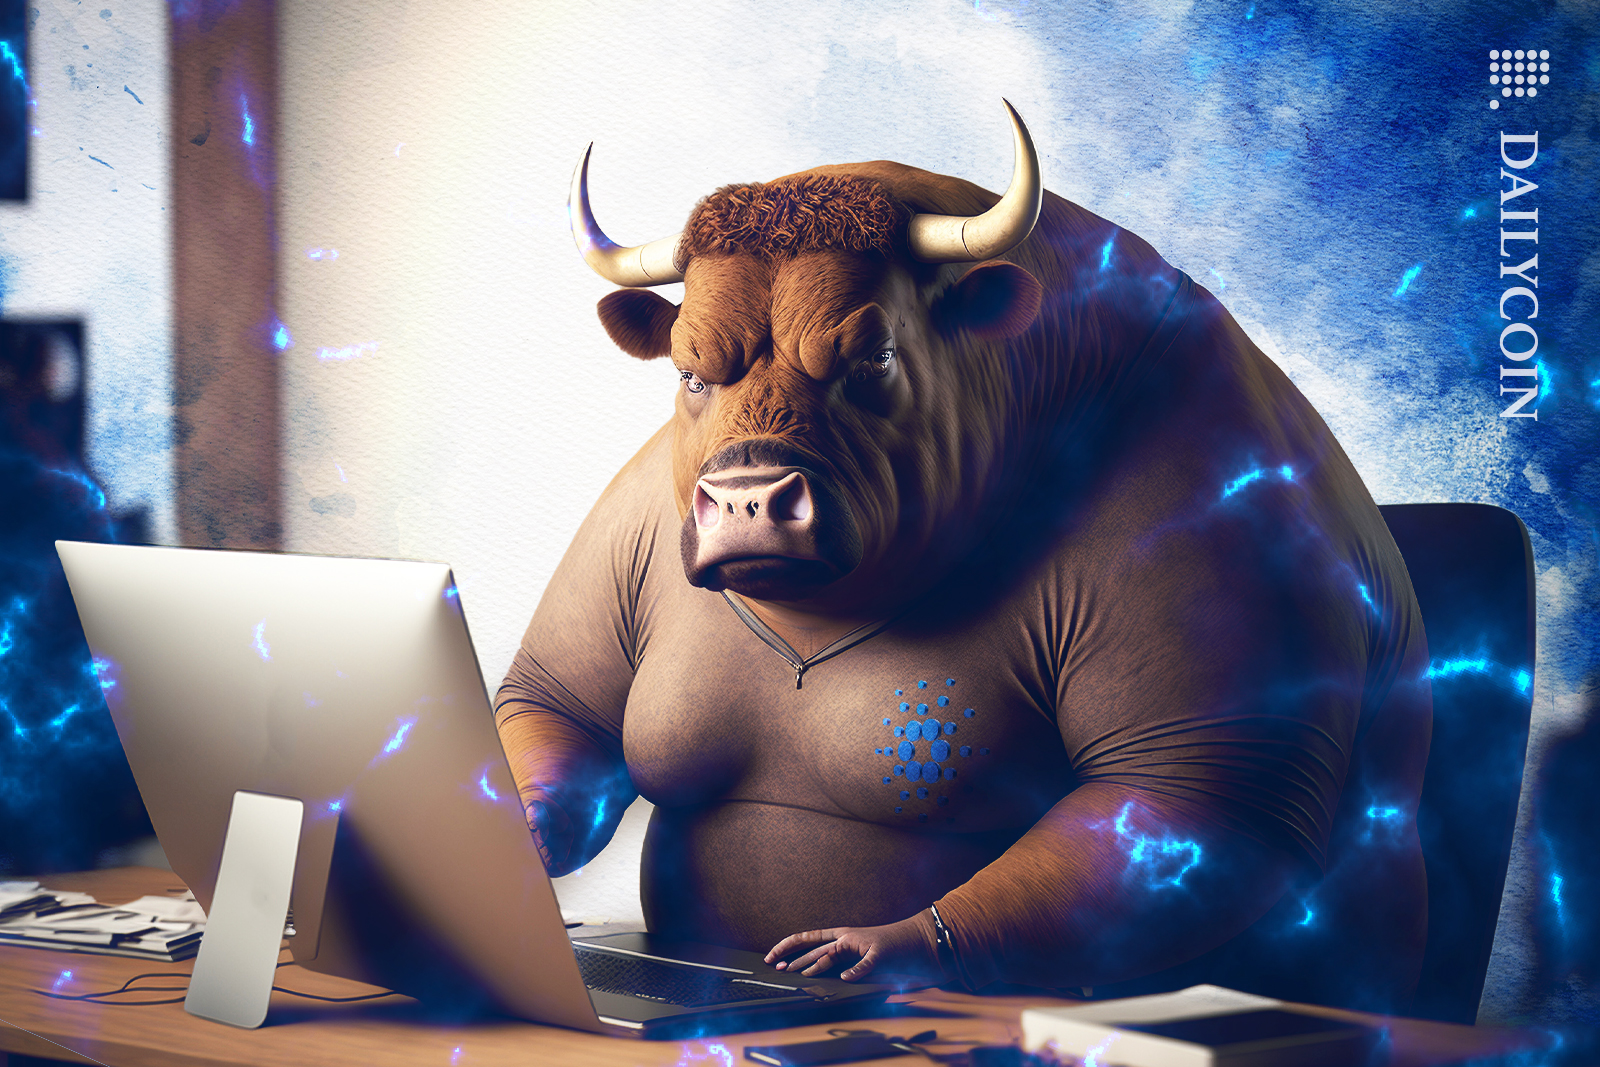 Cardano big, strong bull, sitting in front of a computer surrounded by electricity waves.